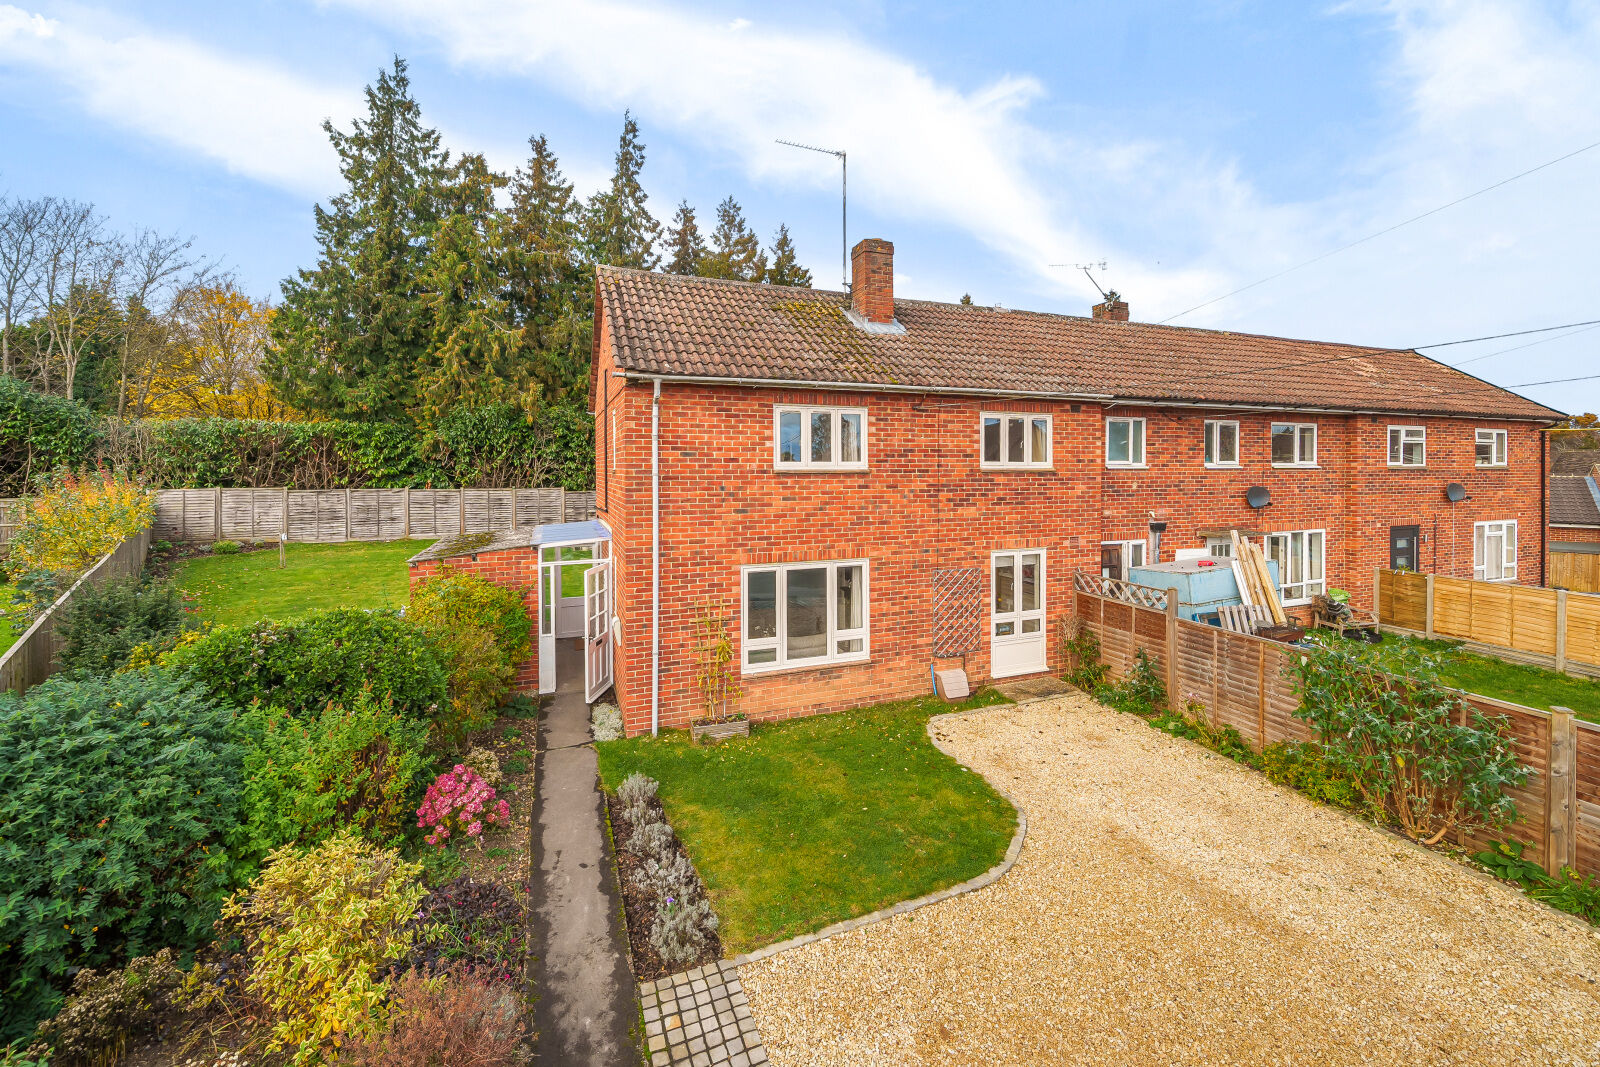 3 bedroom end terraced house for sale Wood Lane Close, Sonning Common, RG4, main image